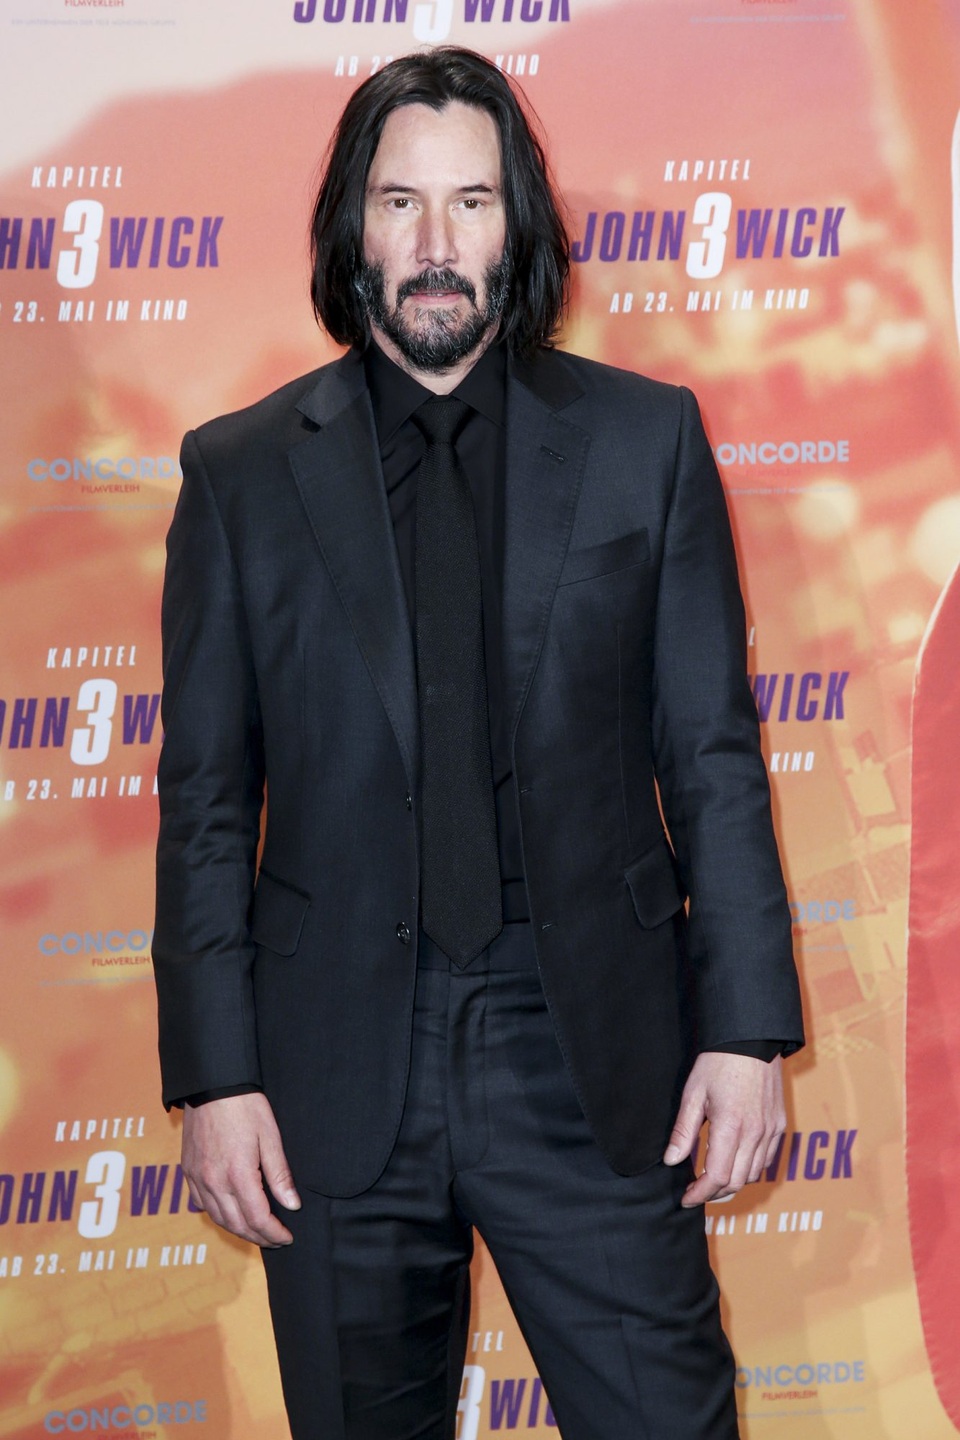 Keanu Reeves' auction for a 15-minute appointment reached... 16,600 USD - 1